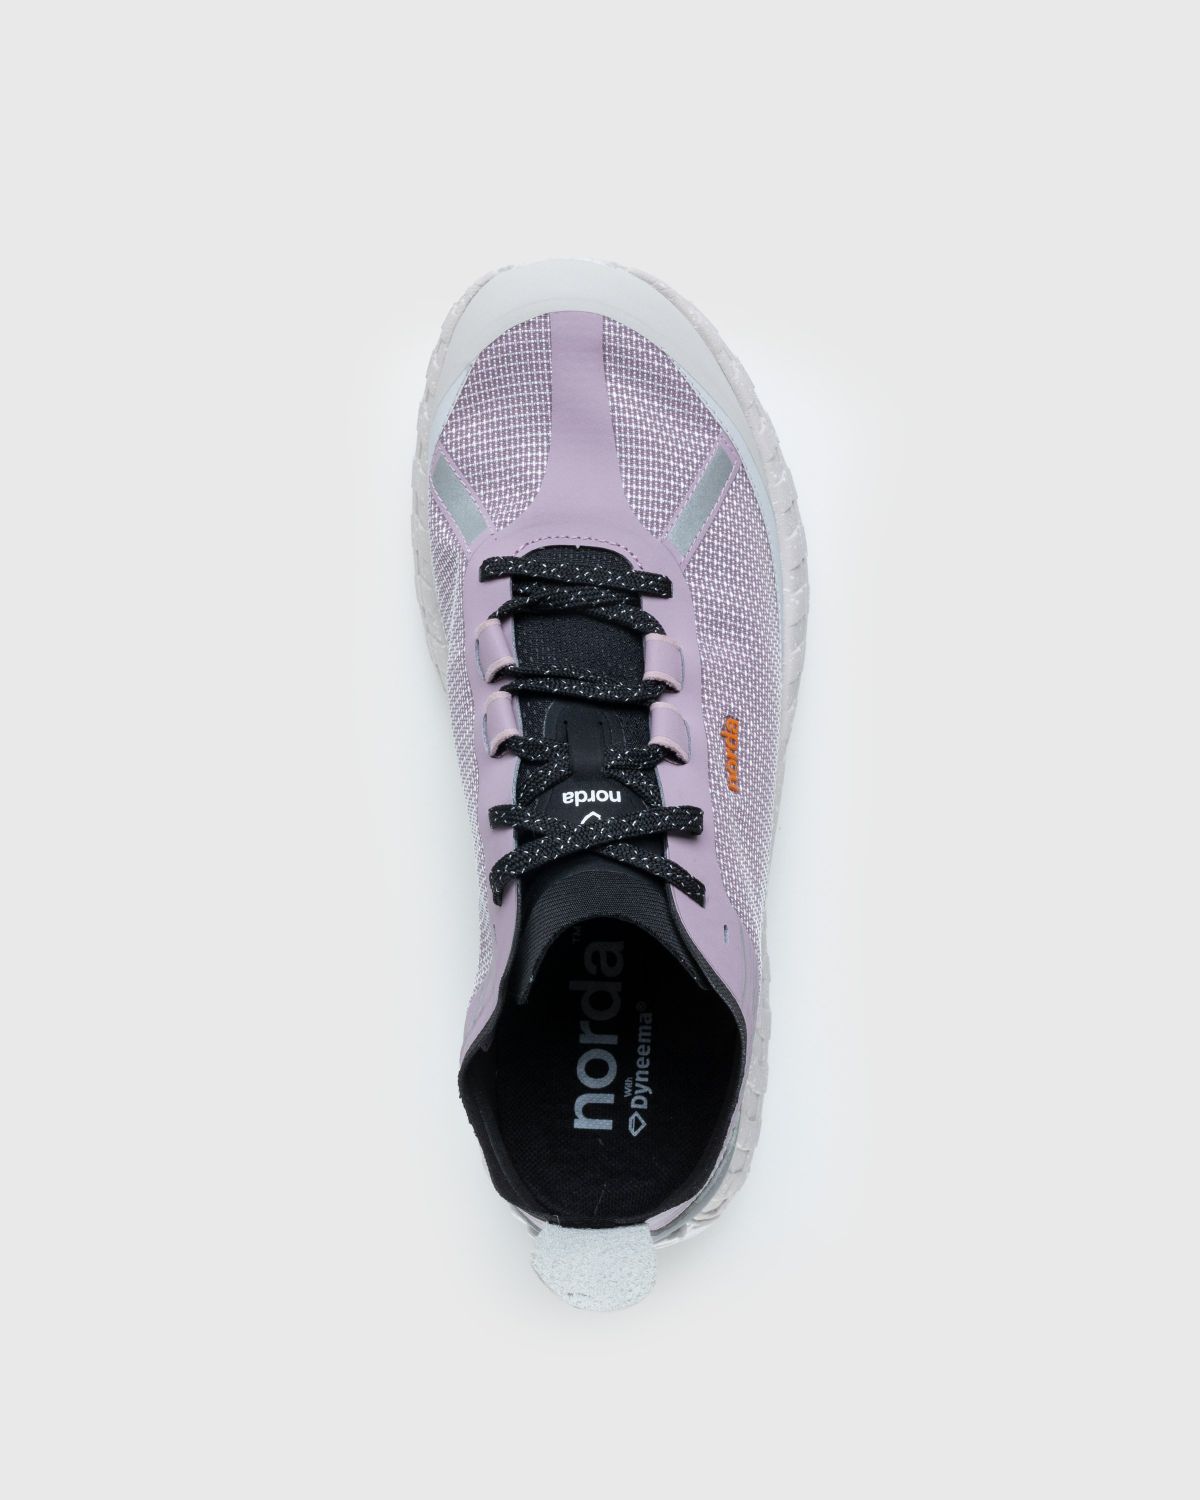 Norda – 001 W LTD Edition Lilac - Low Top Sneakers - Purple - Image 5